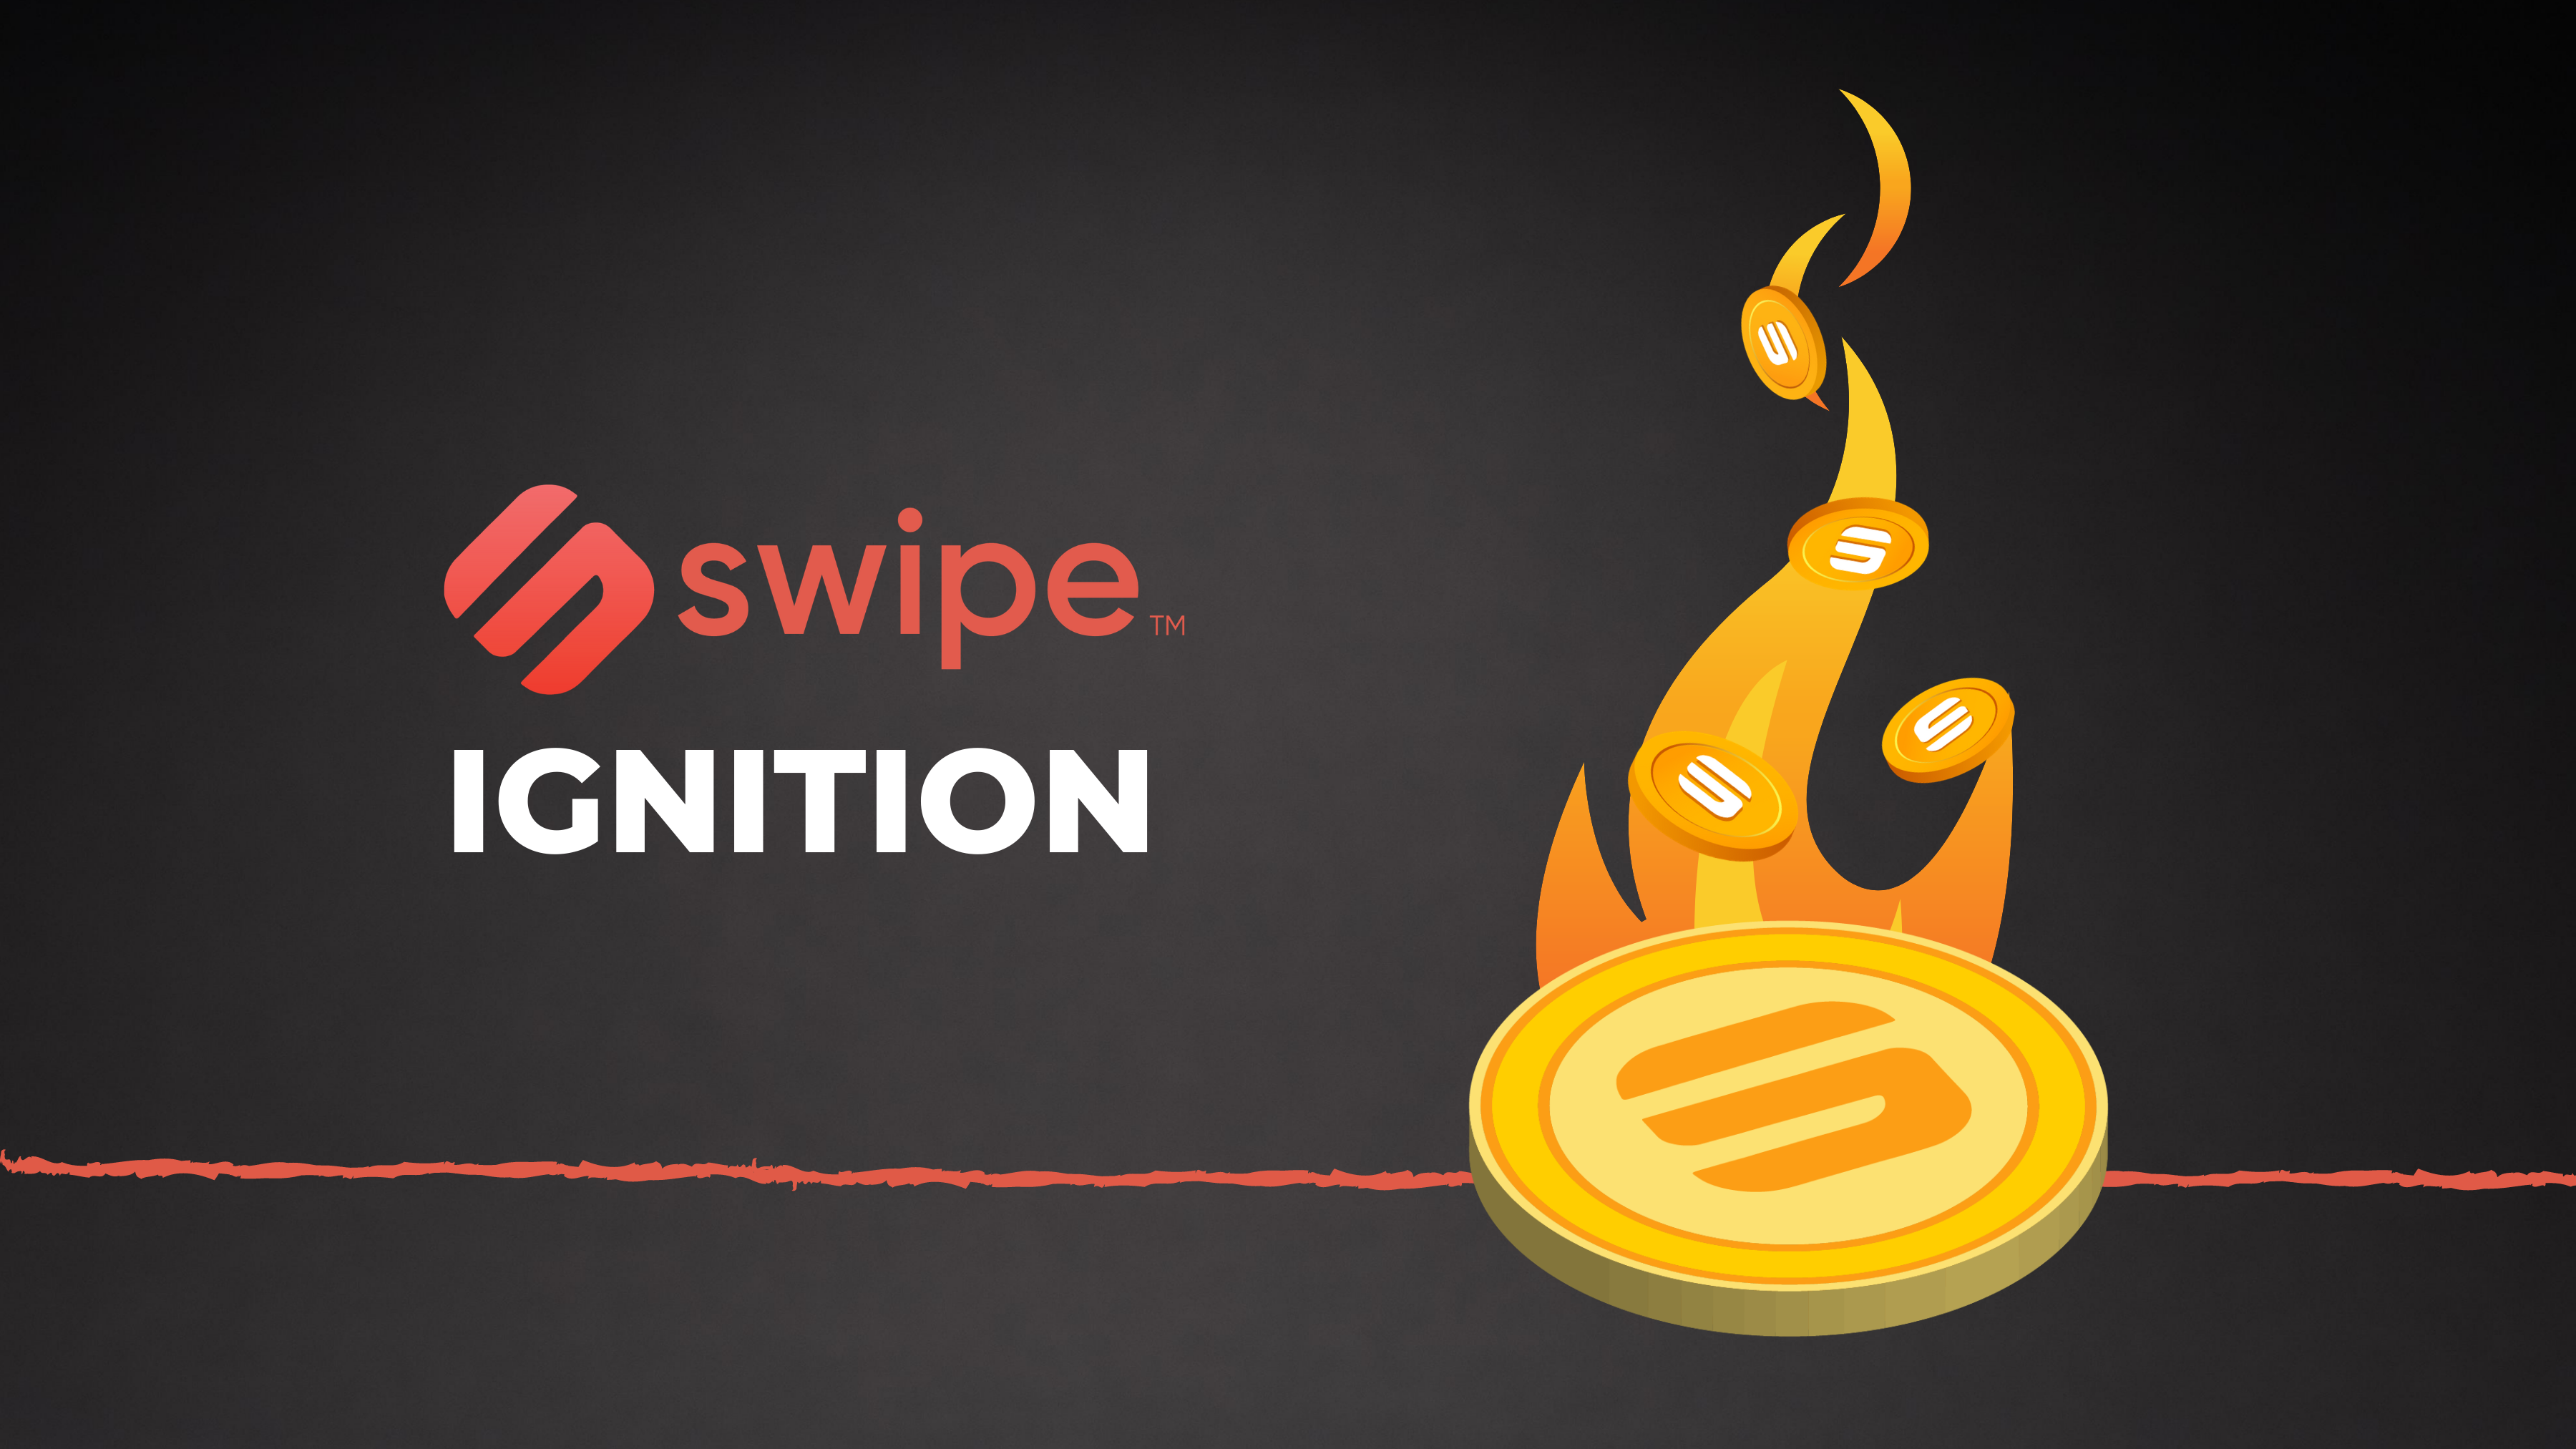 Swipe Launches Ignition Initial Wallet Offering Platform With Sxp By Swipe Swipe